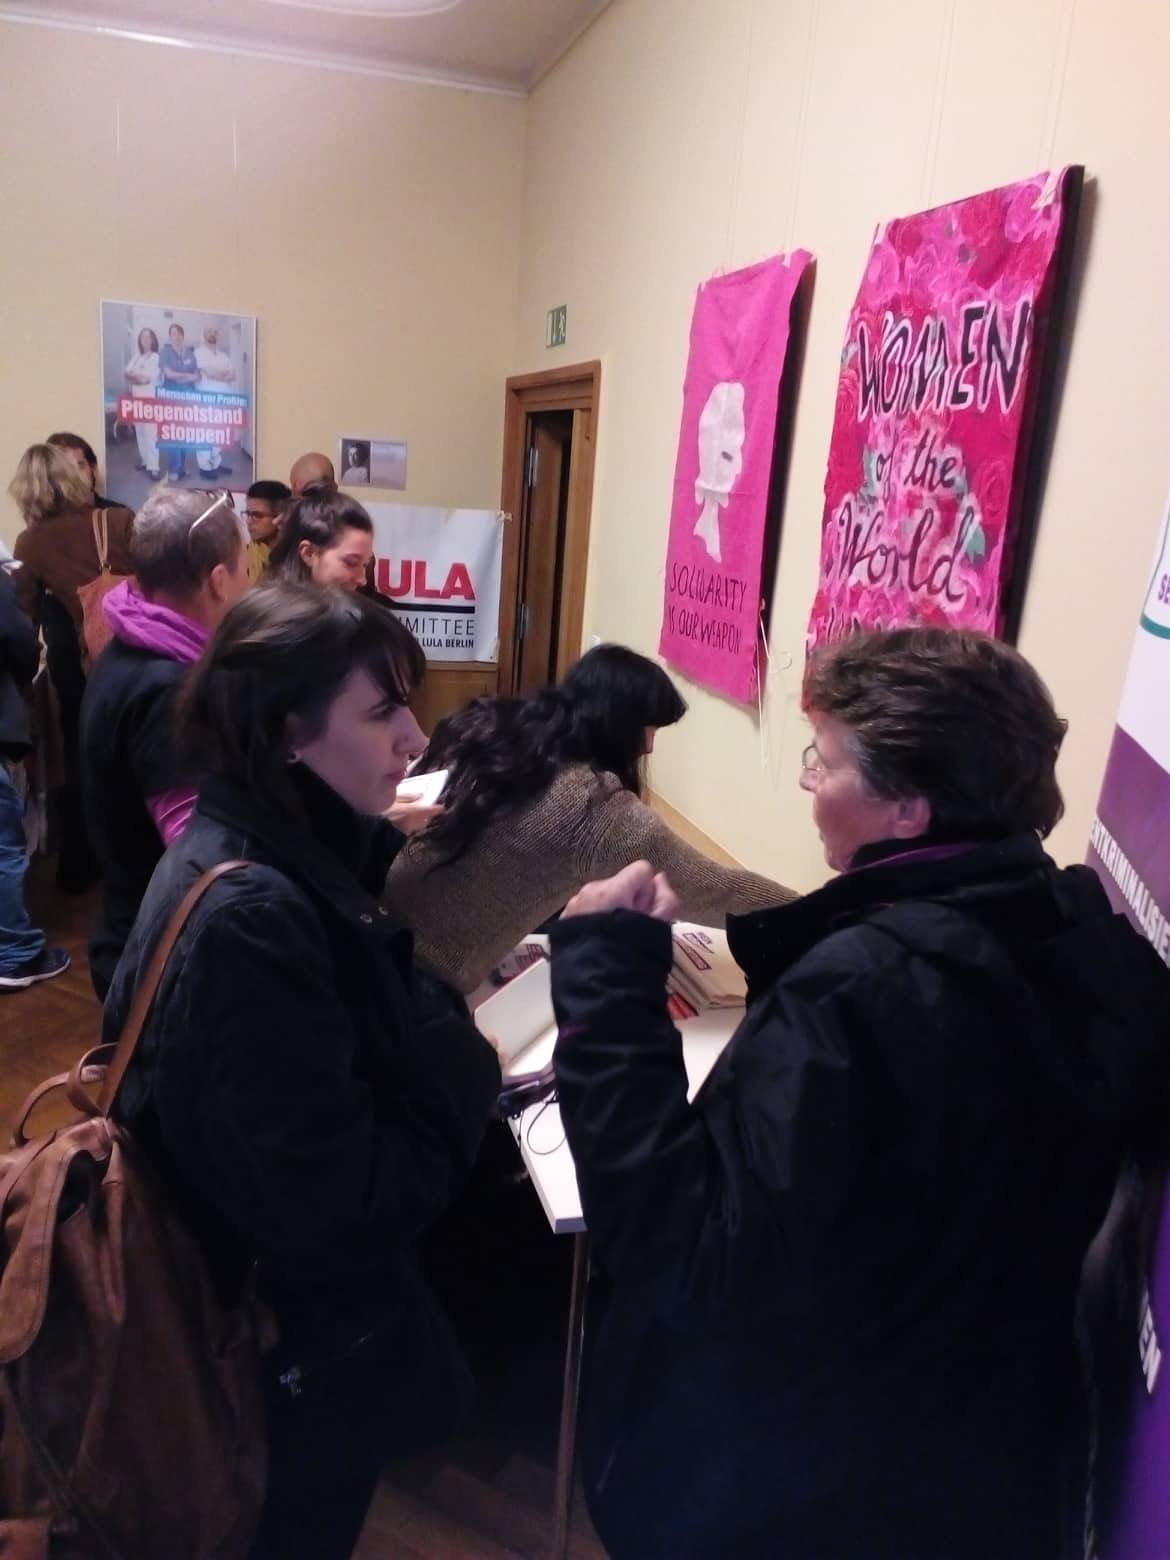 Infostand / Reproductive Rights in Latin America